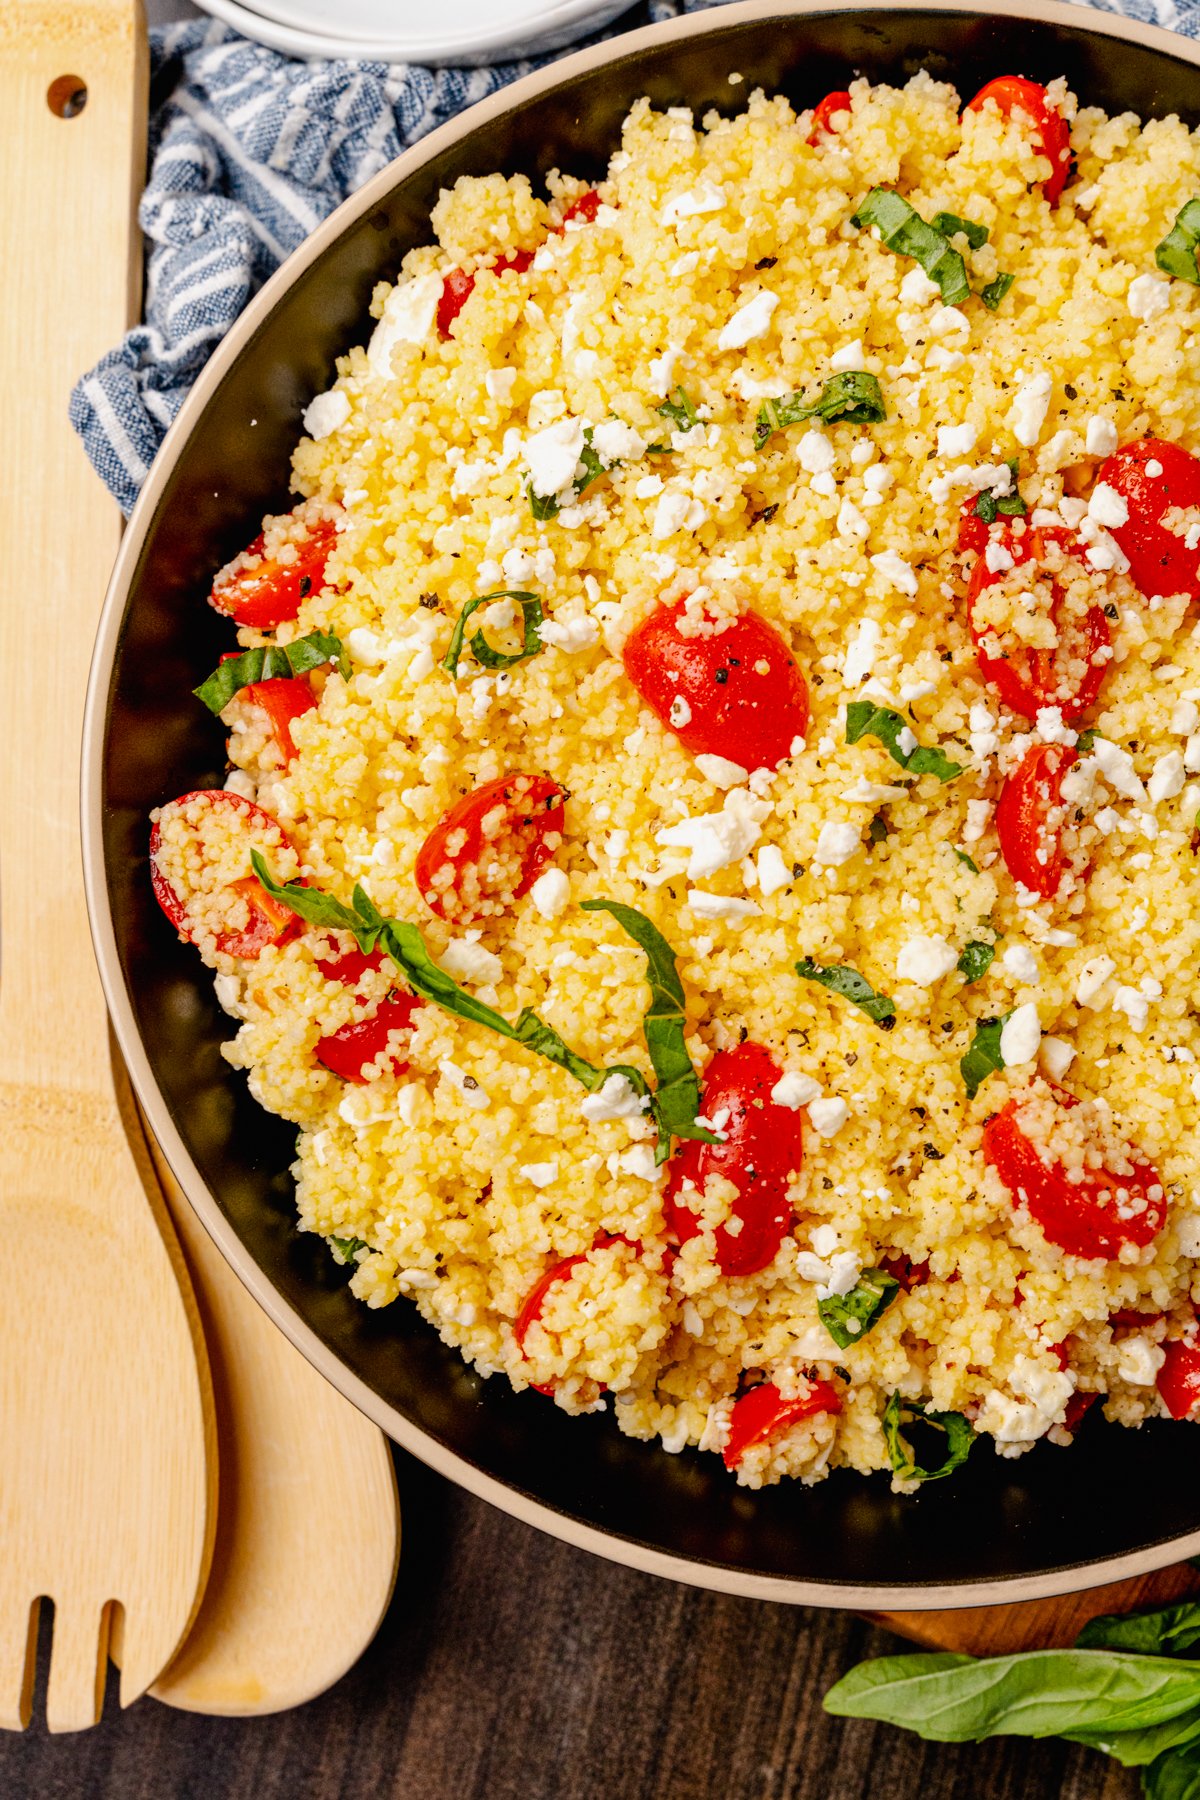 Couscous Salad With Tomatoes And Feta - A Southern Soul